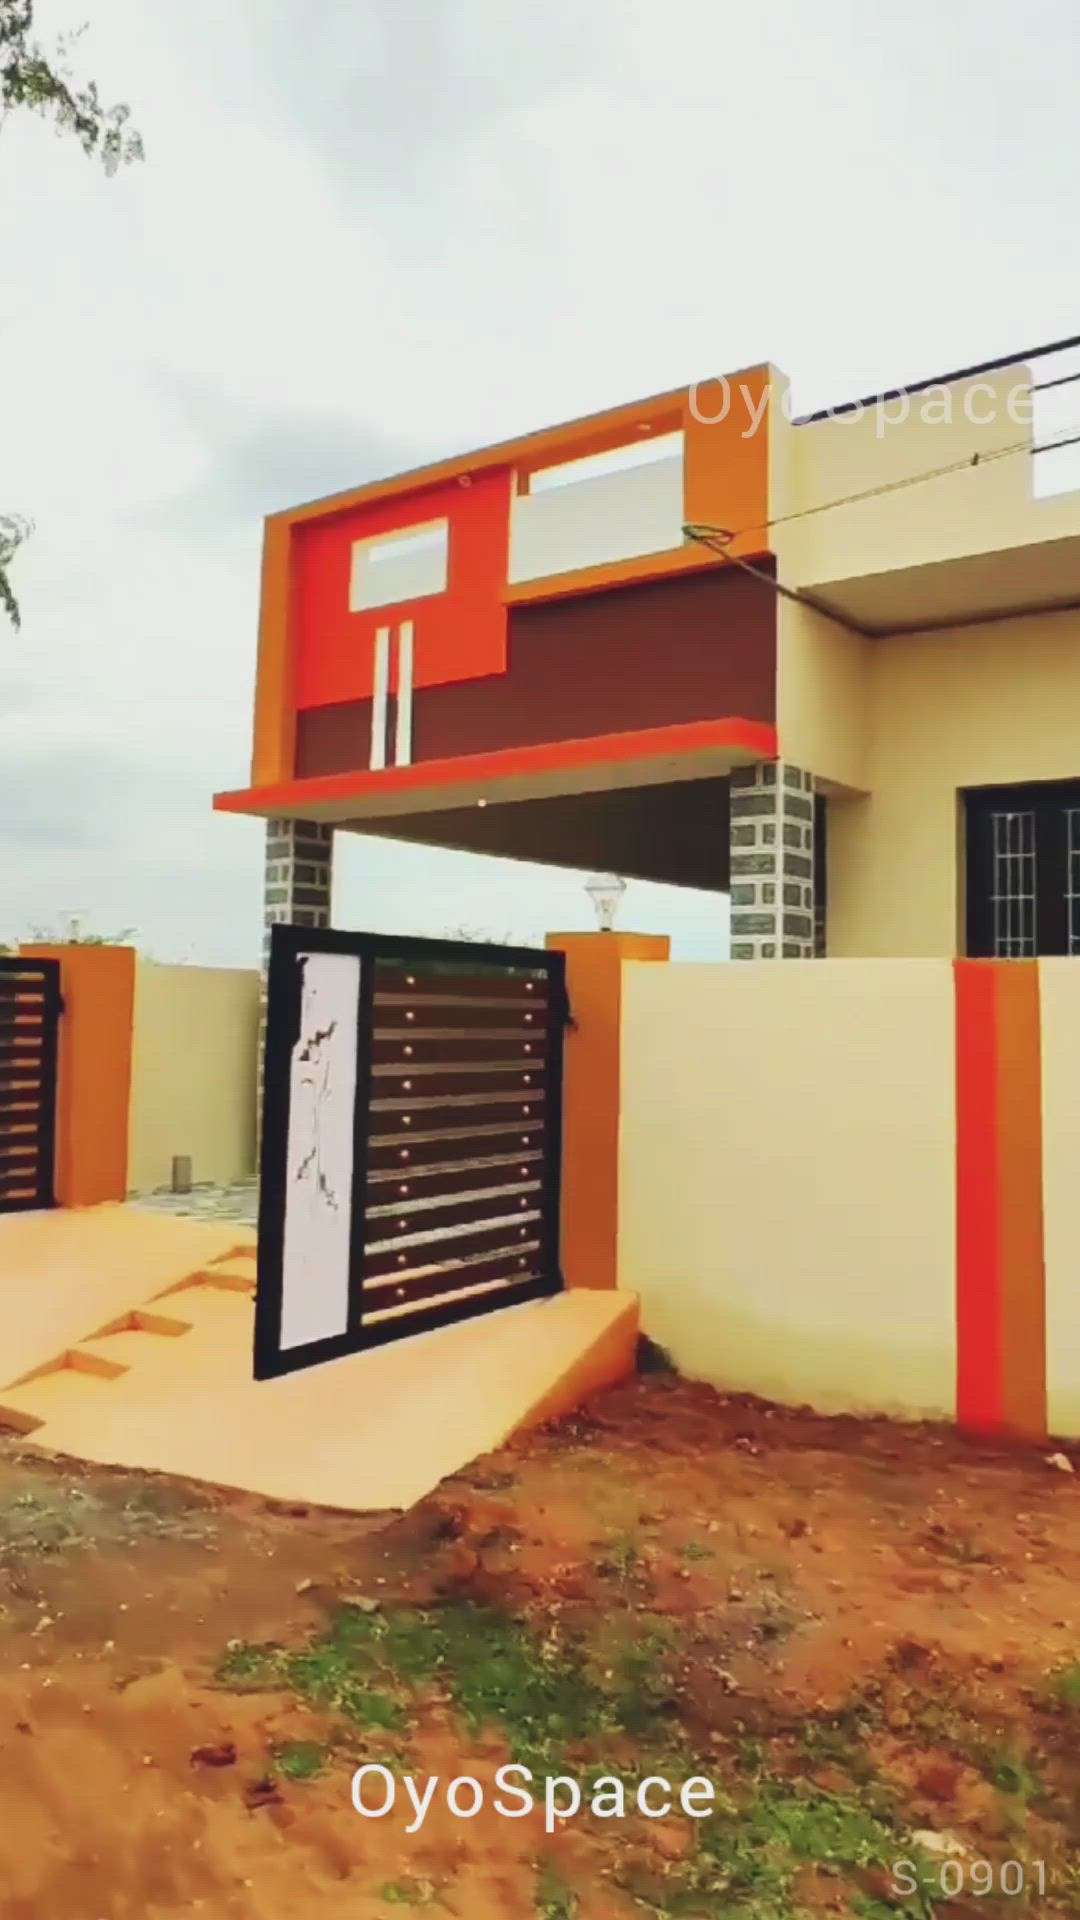 Exterior, Wall, Furniture Designs by Civil Engineer Oyo Space, Bhopal | Kolo